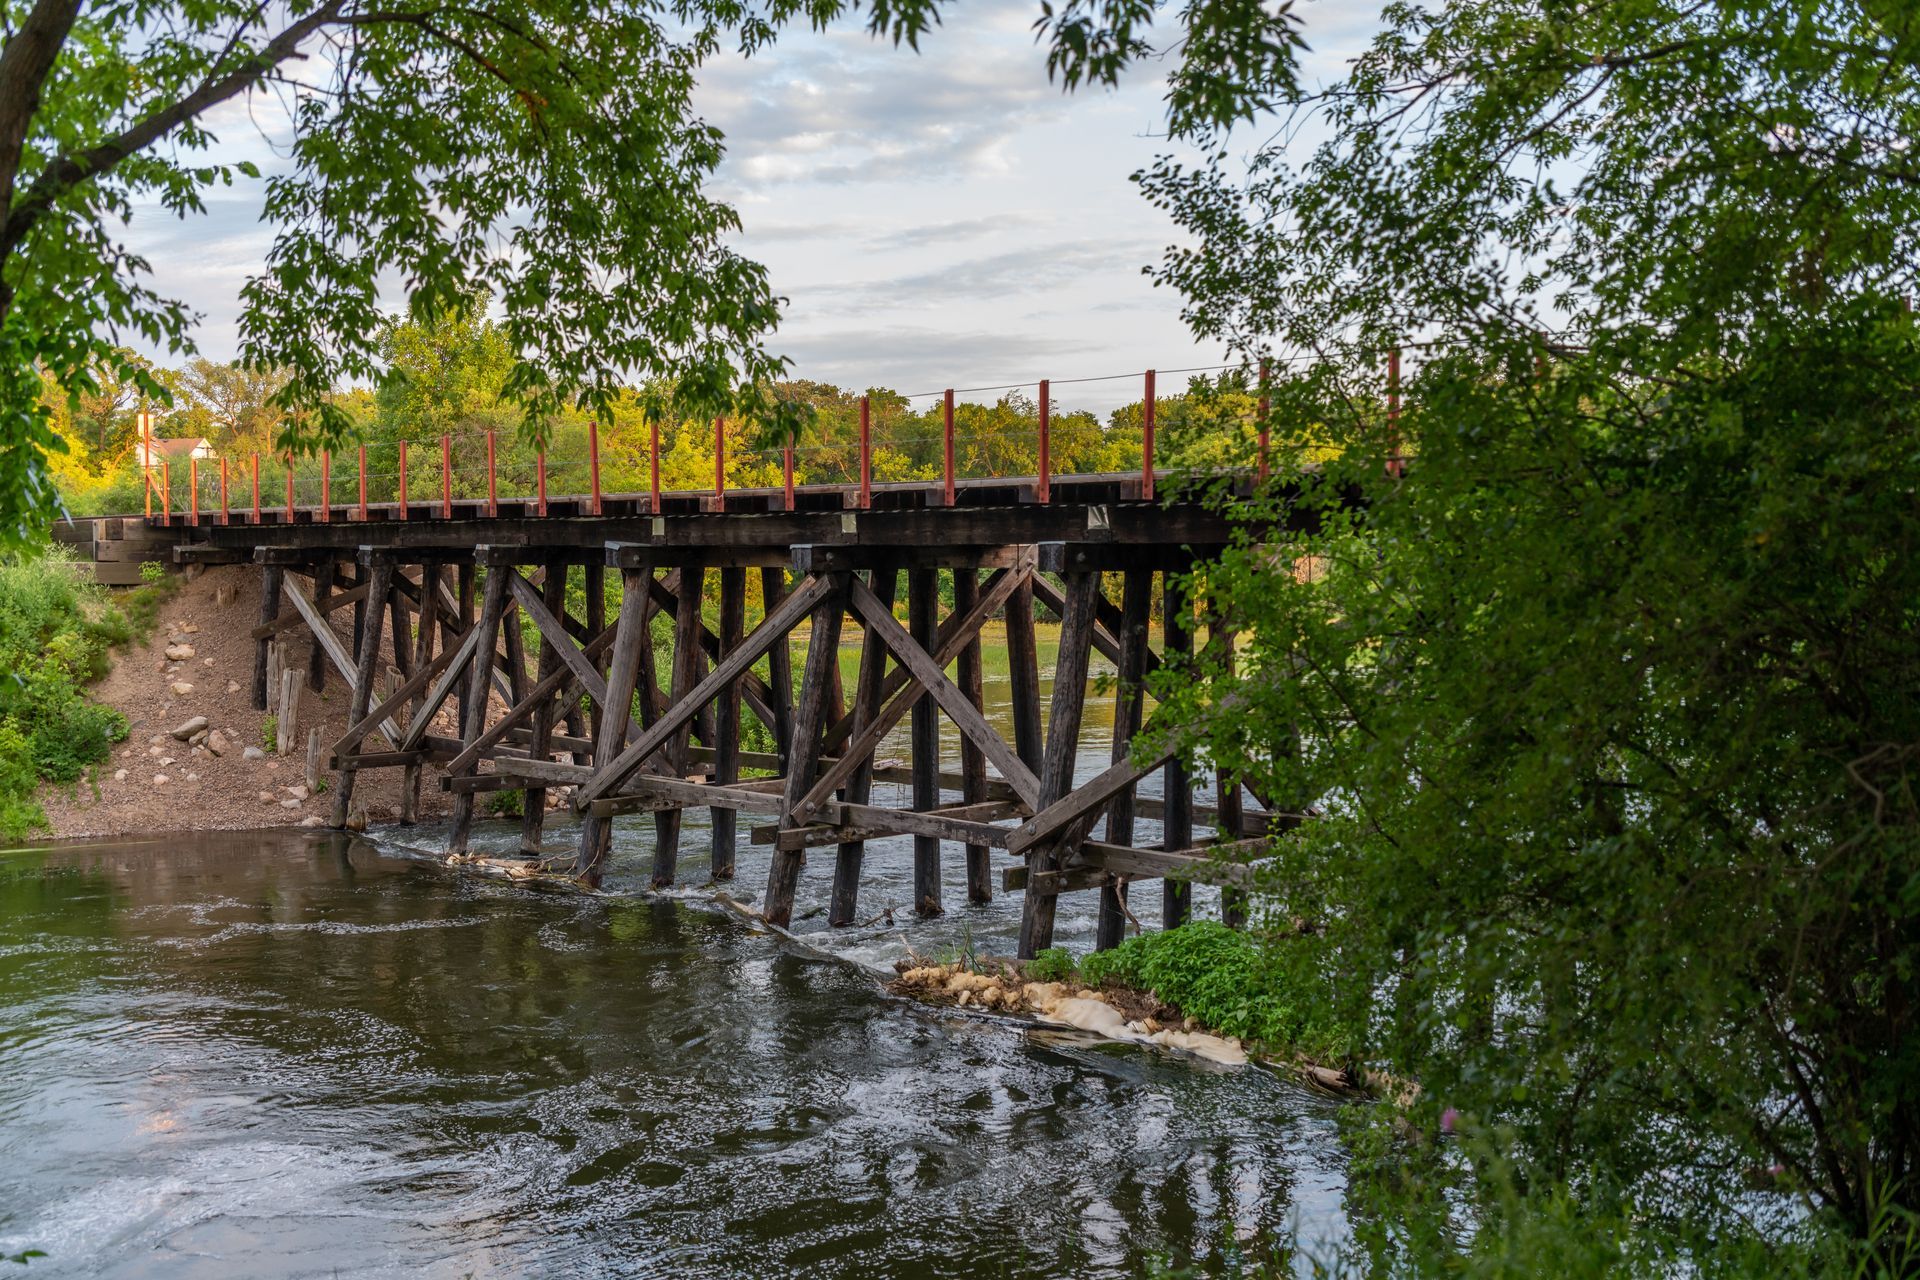 A wooden bridge over a river surrounded by trees.